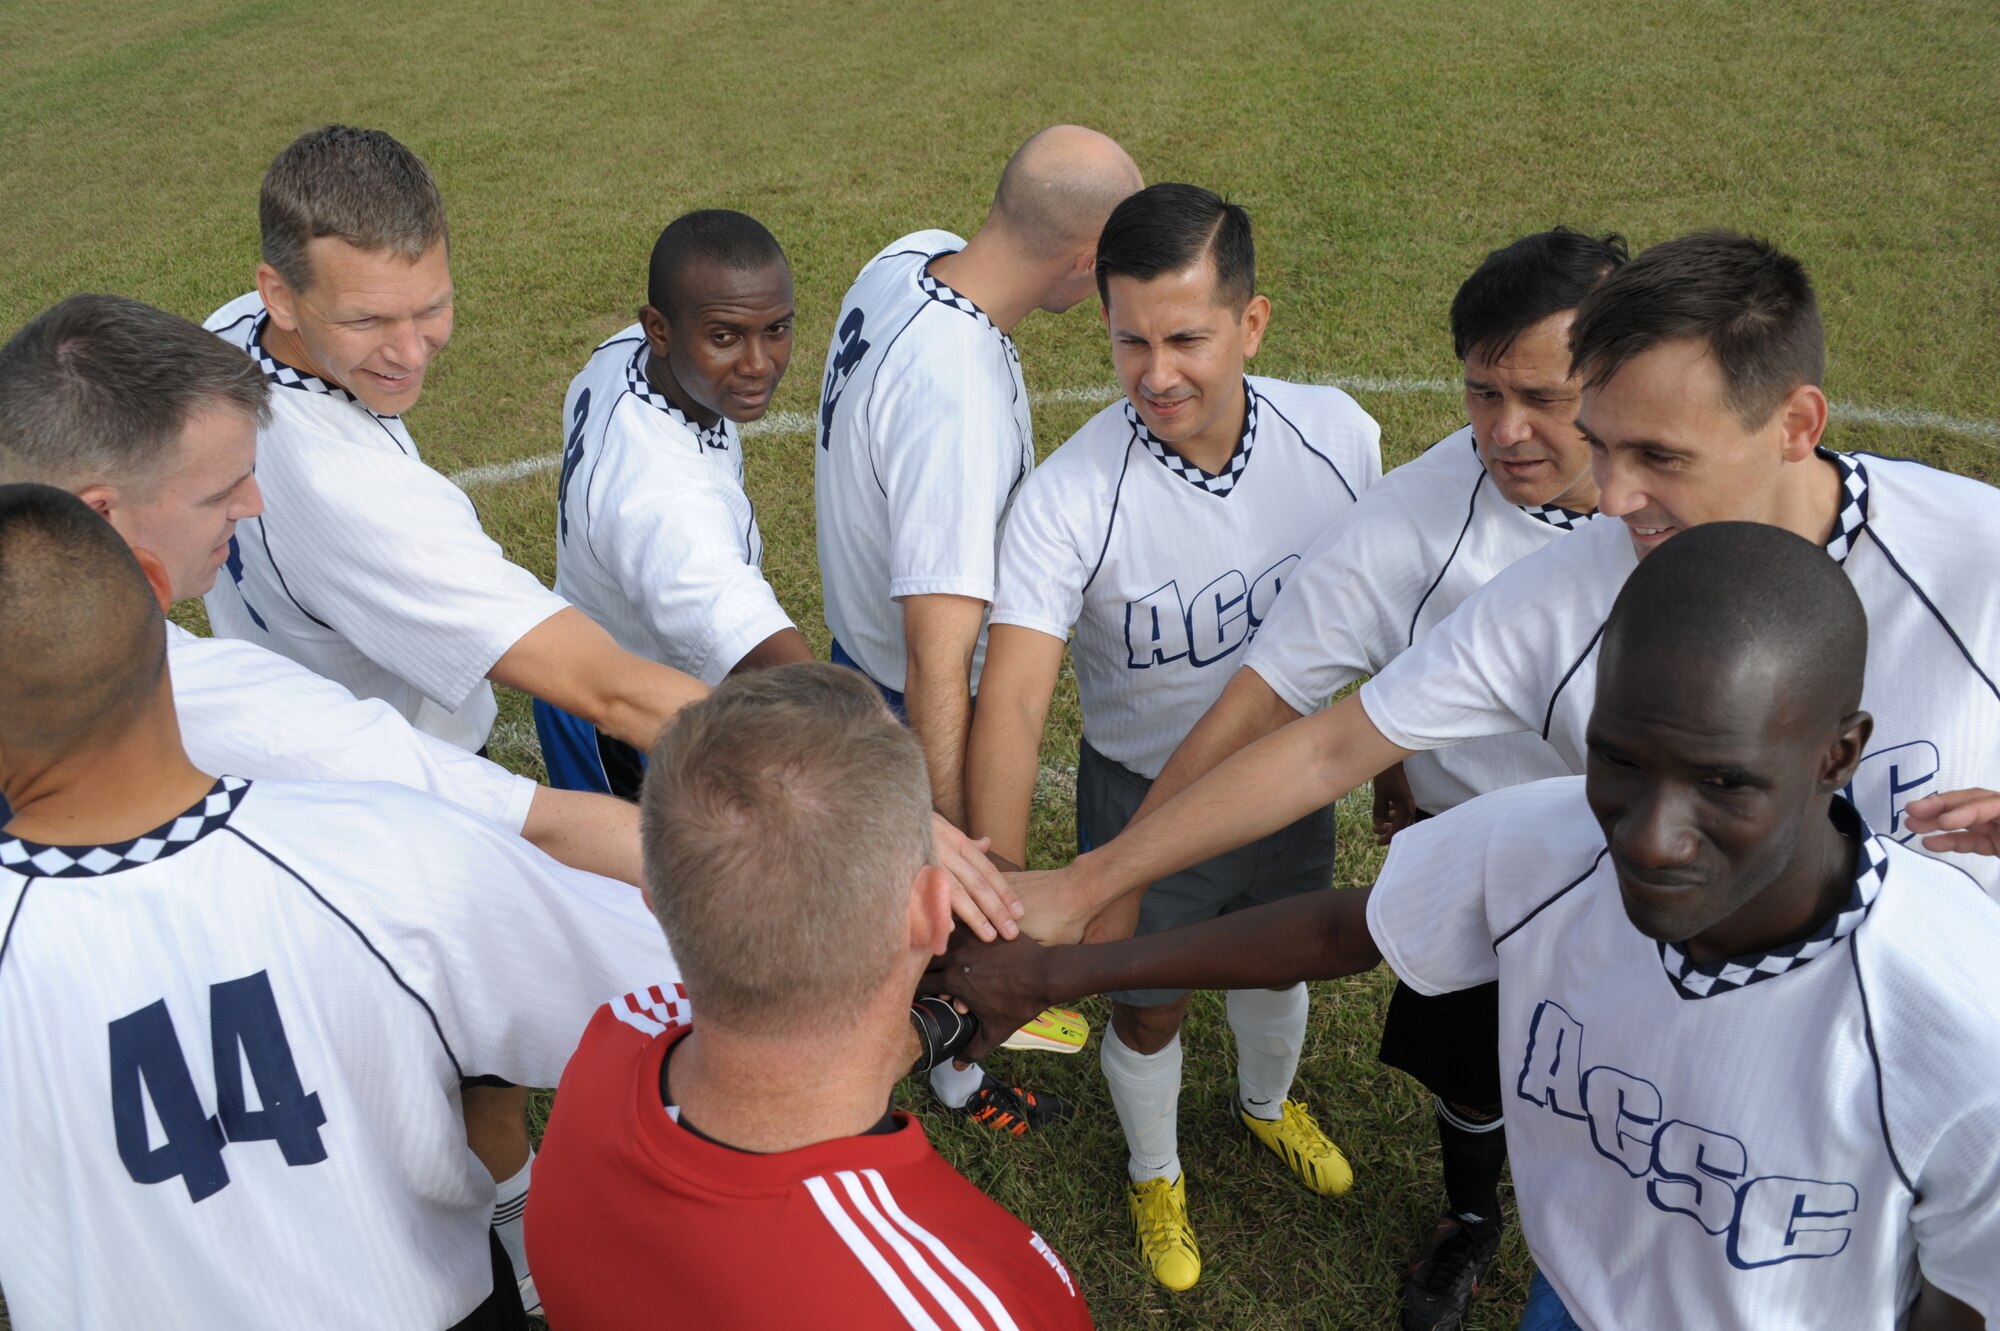 Students from Air Command Staff Collegeprepare for a soccer game against Air War College on Maxwell Air Force Base, Oct. 8. The game was part of a 2-day competition between the academic powerhouses compiling of approximately 20 events, both scholastic and athletic. (U.S. Air Force photo by Airman 1st Class William Blankenship)